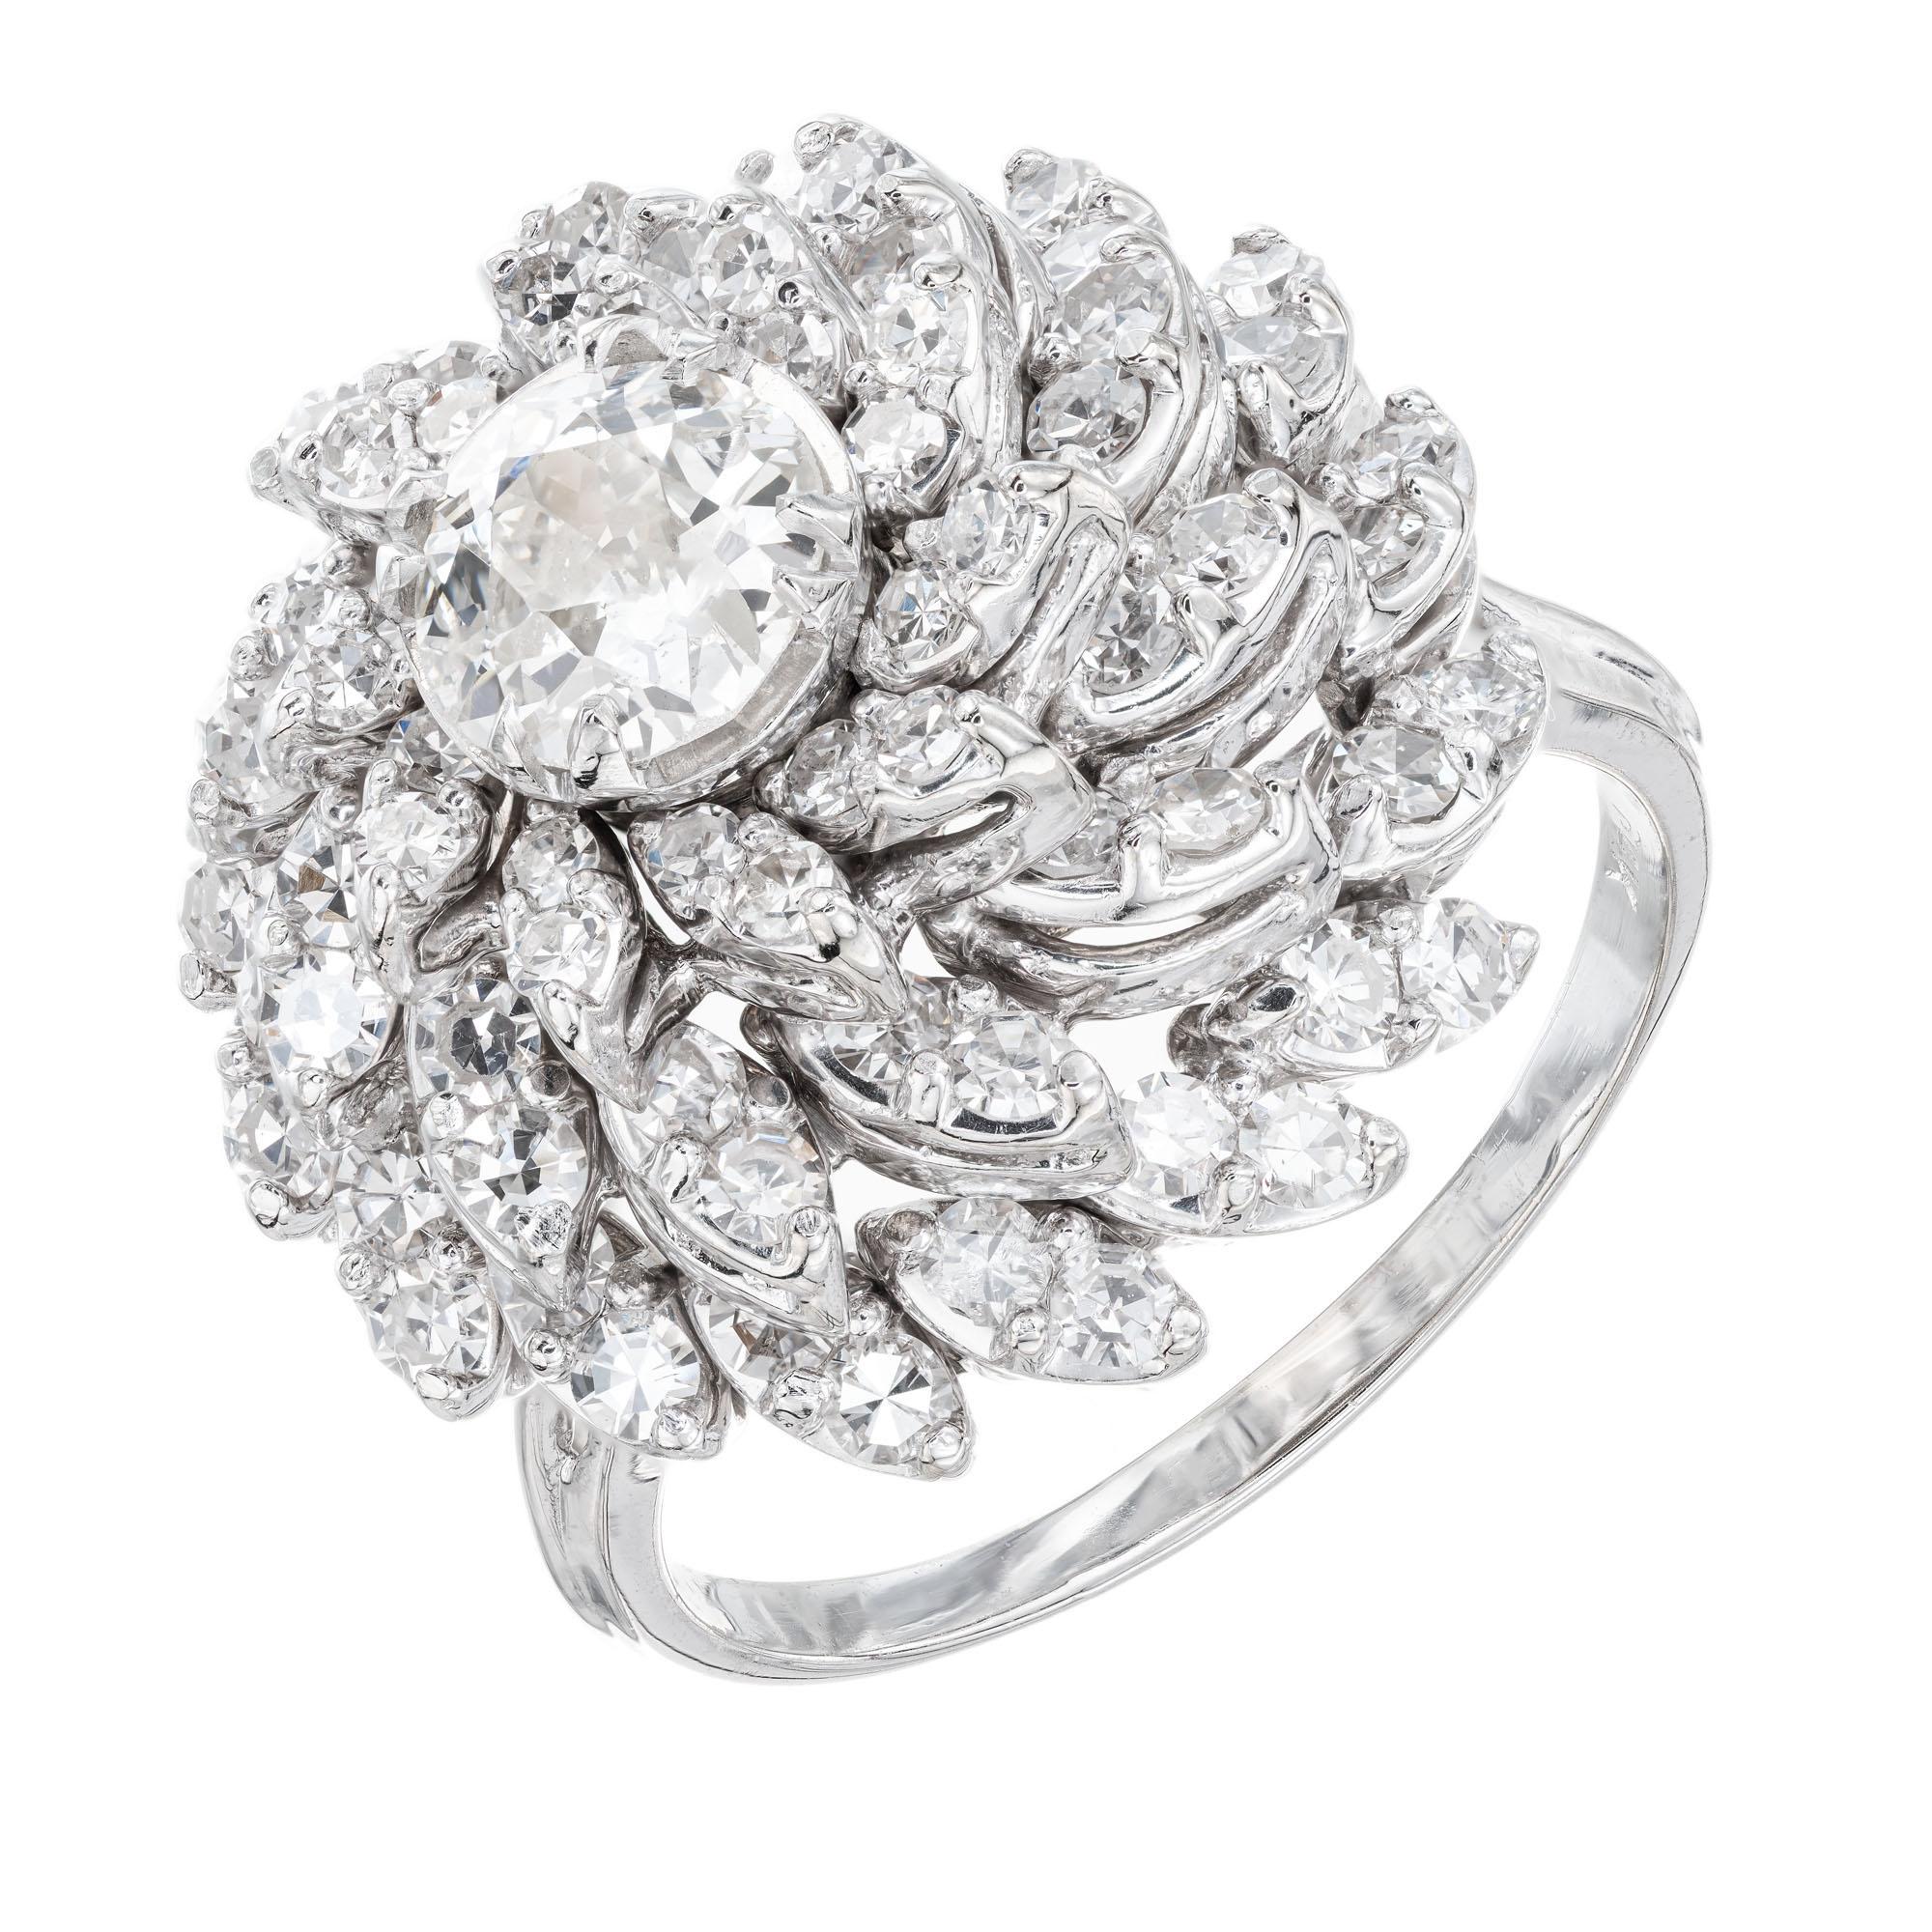 Diamond domed cocktail ring. Old European cut .94ct center stone accented with three tiers of round cut diamonds in 14k white gold petals and setting.  14k white gold. Raised spiral design circa early 1900's.

1 Old European diamond, I-J I-I approx.